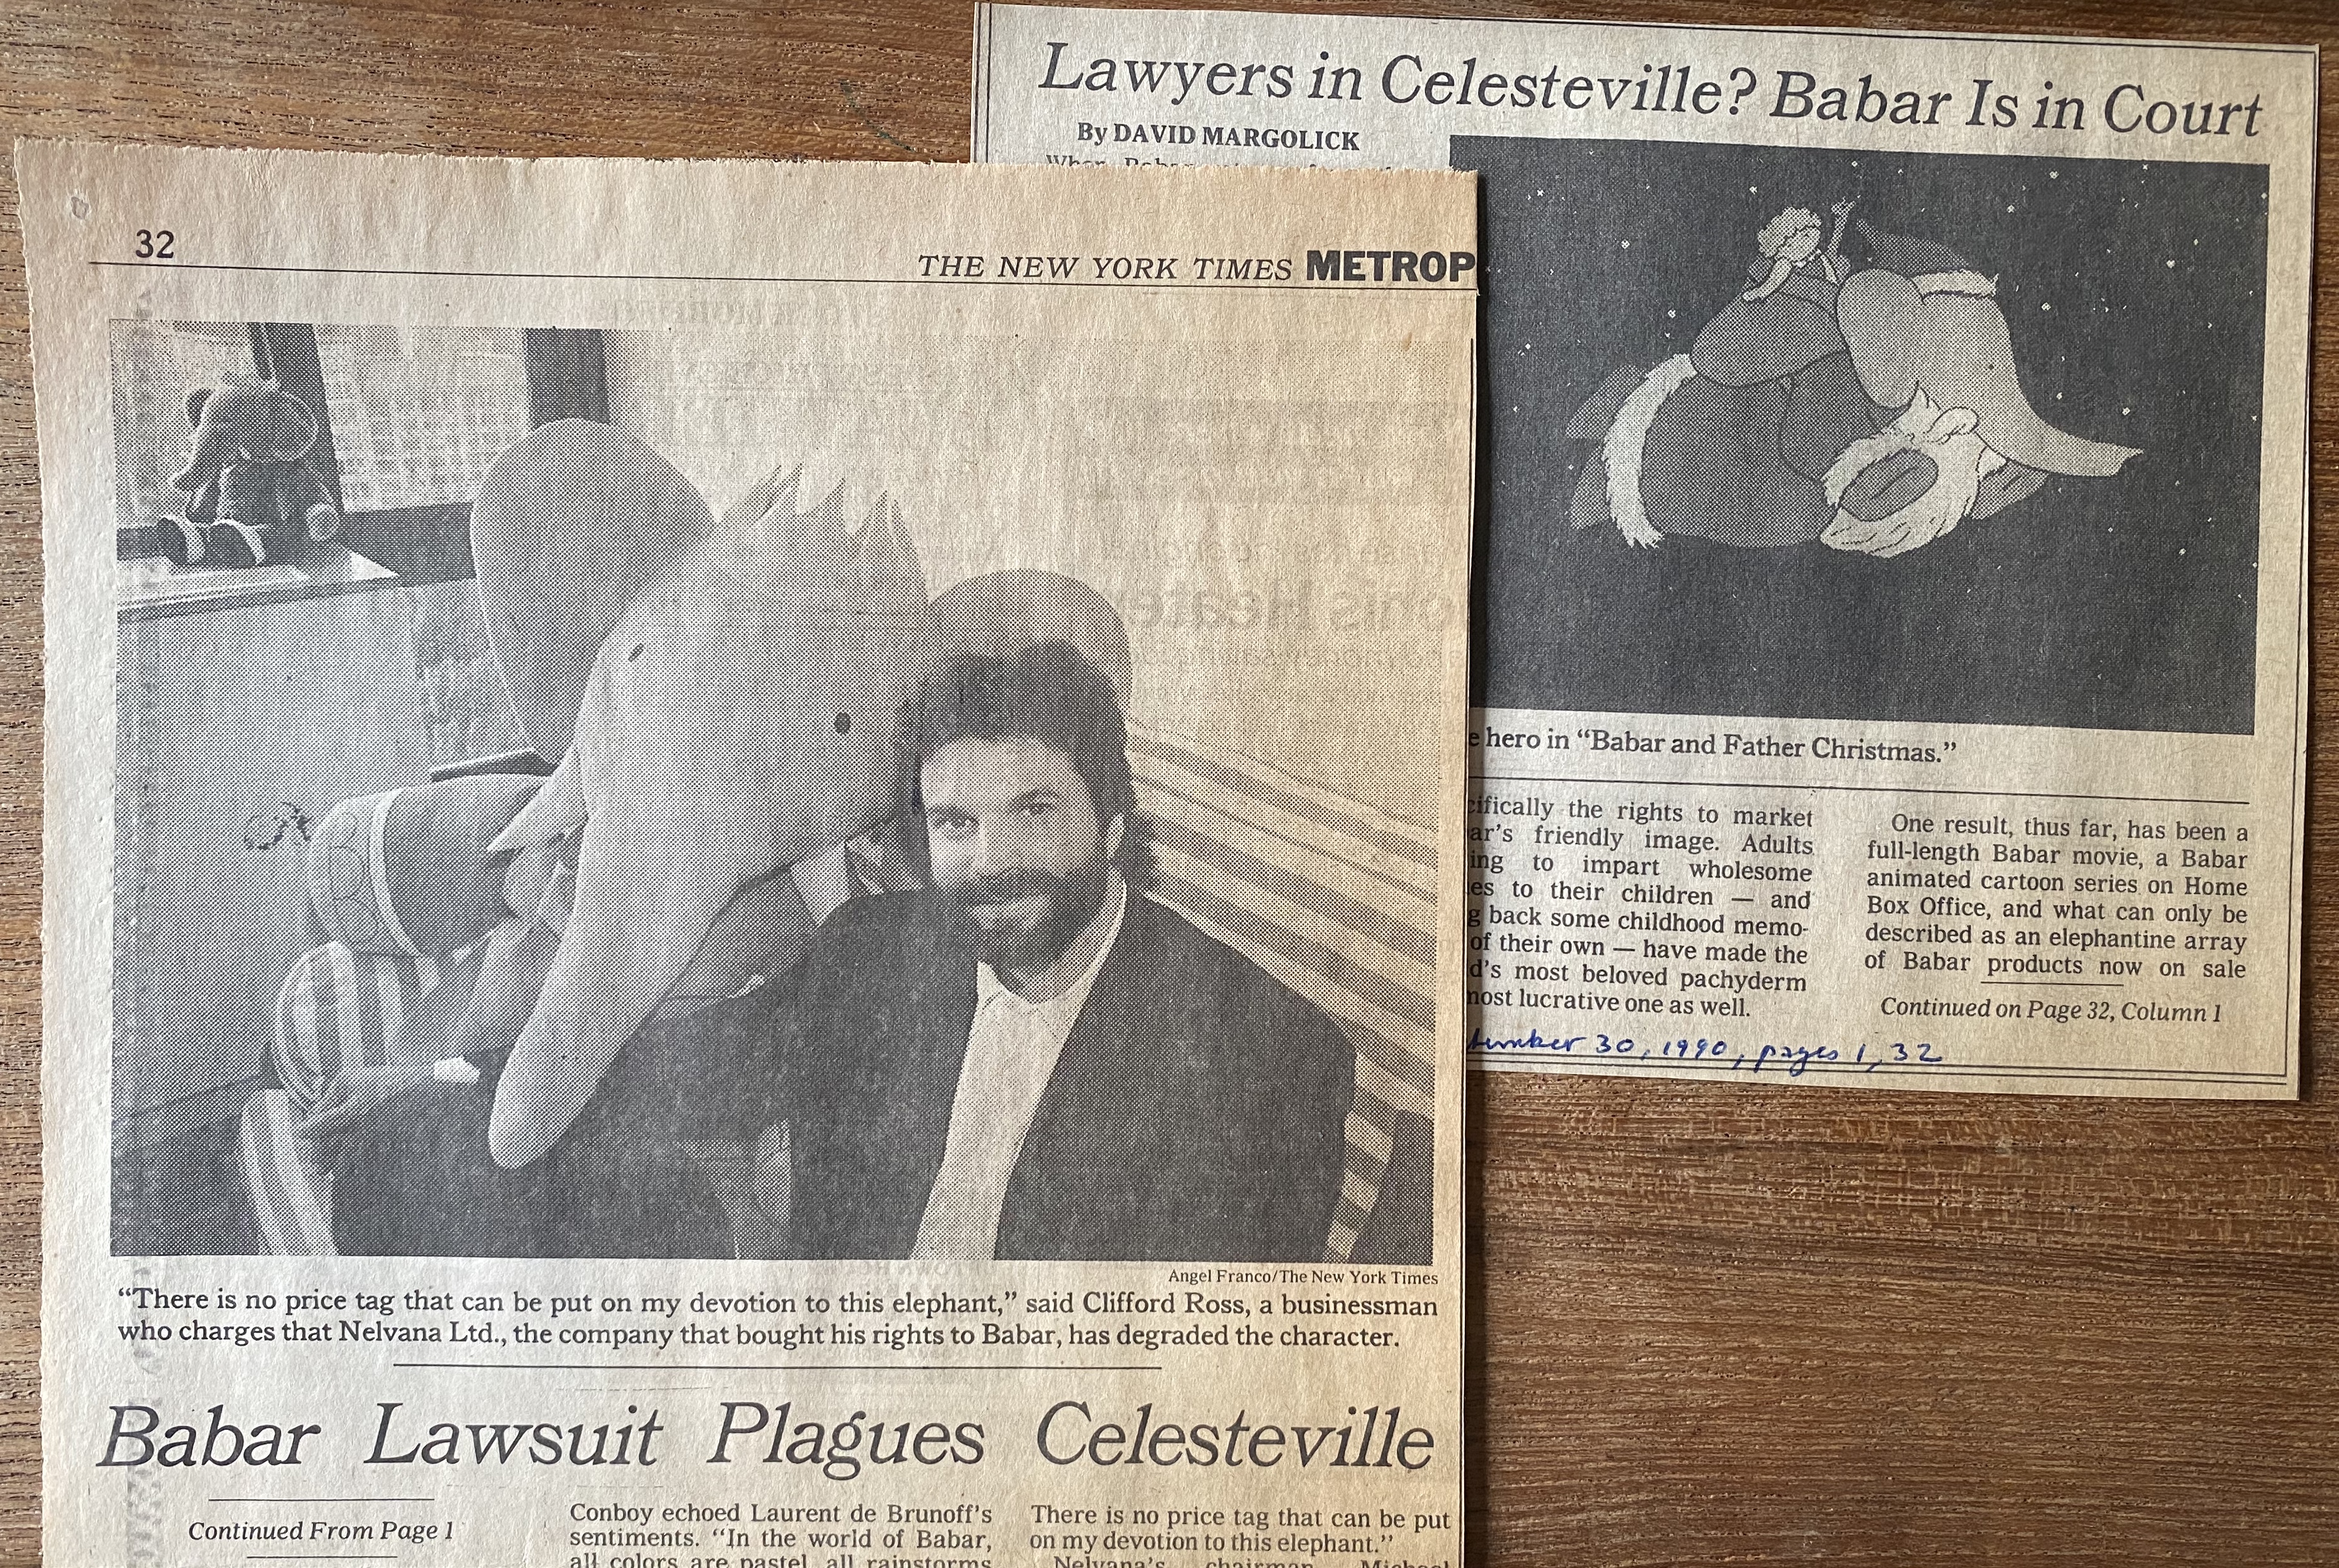 Jean de Brunhoff). David Margolick. Lawyers in Clesteville? Barbar Is in  Court. The New York Times. September 30, 1990. Clipping - J.N. Herlin, Inc.